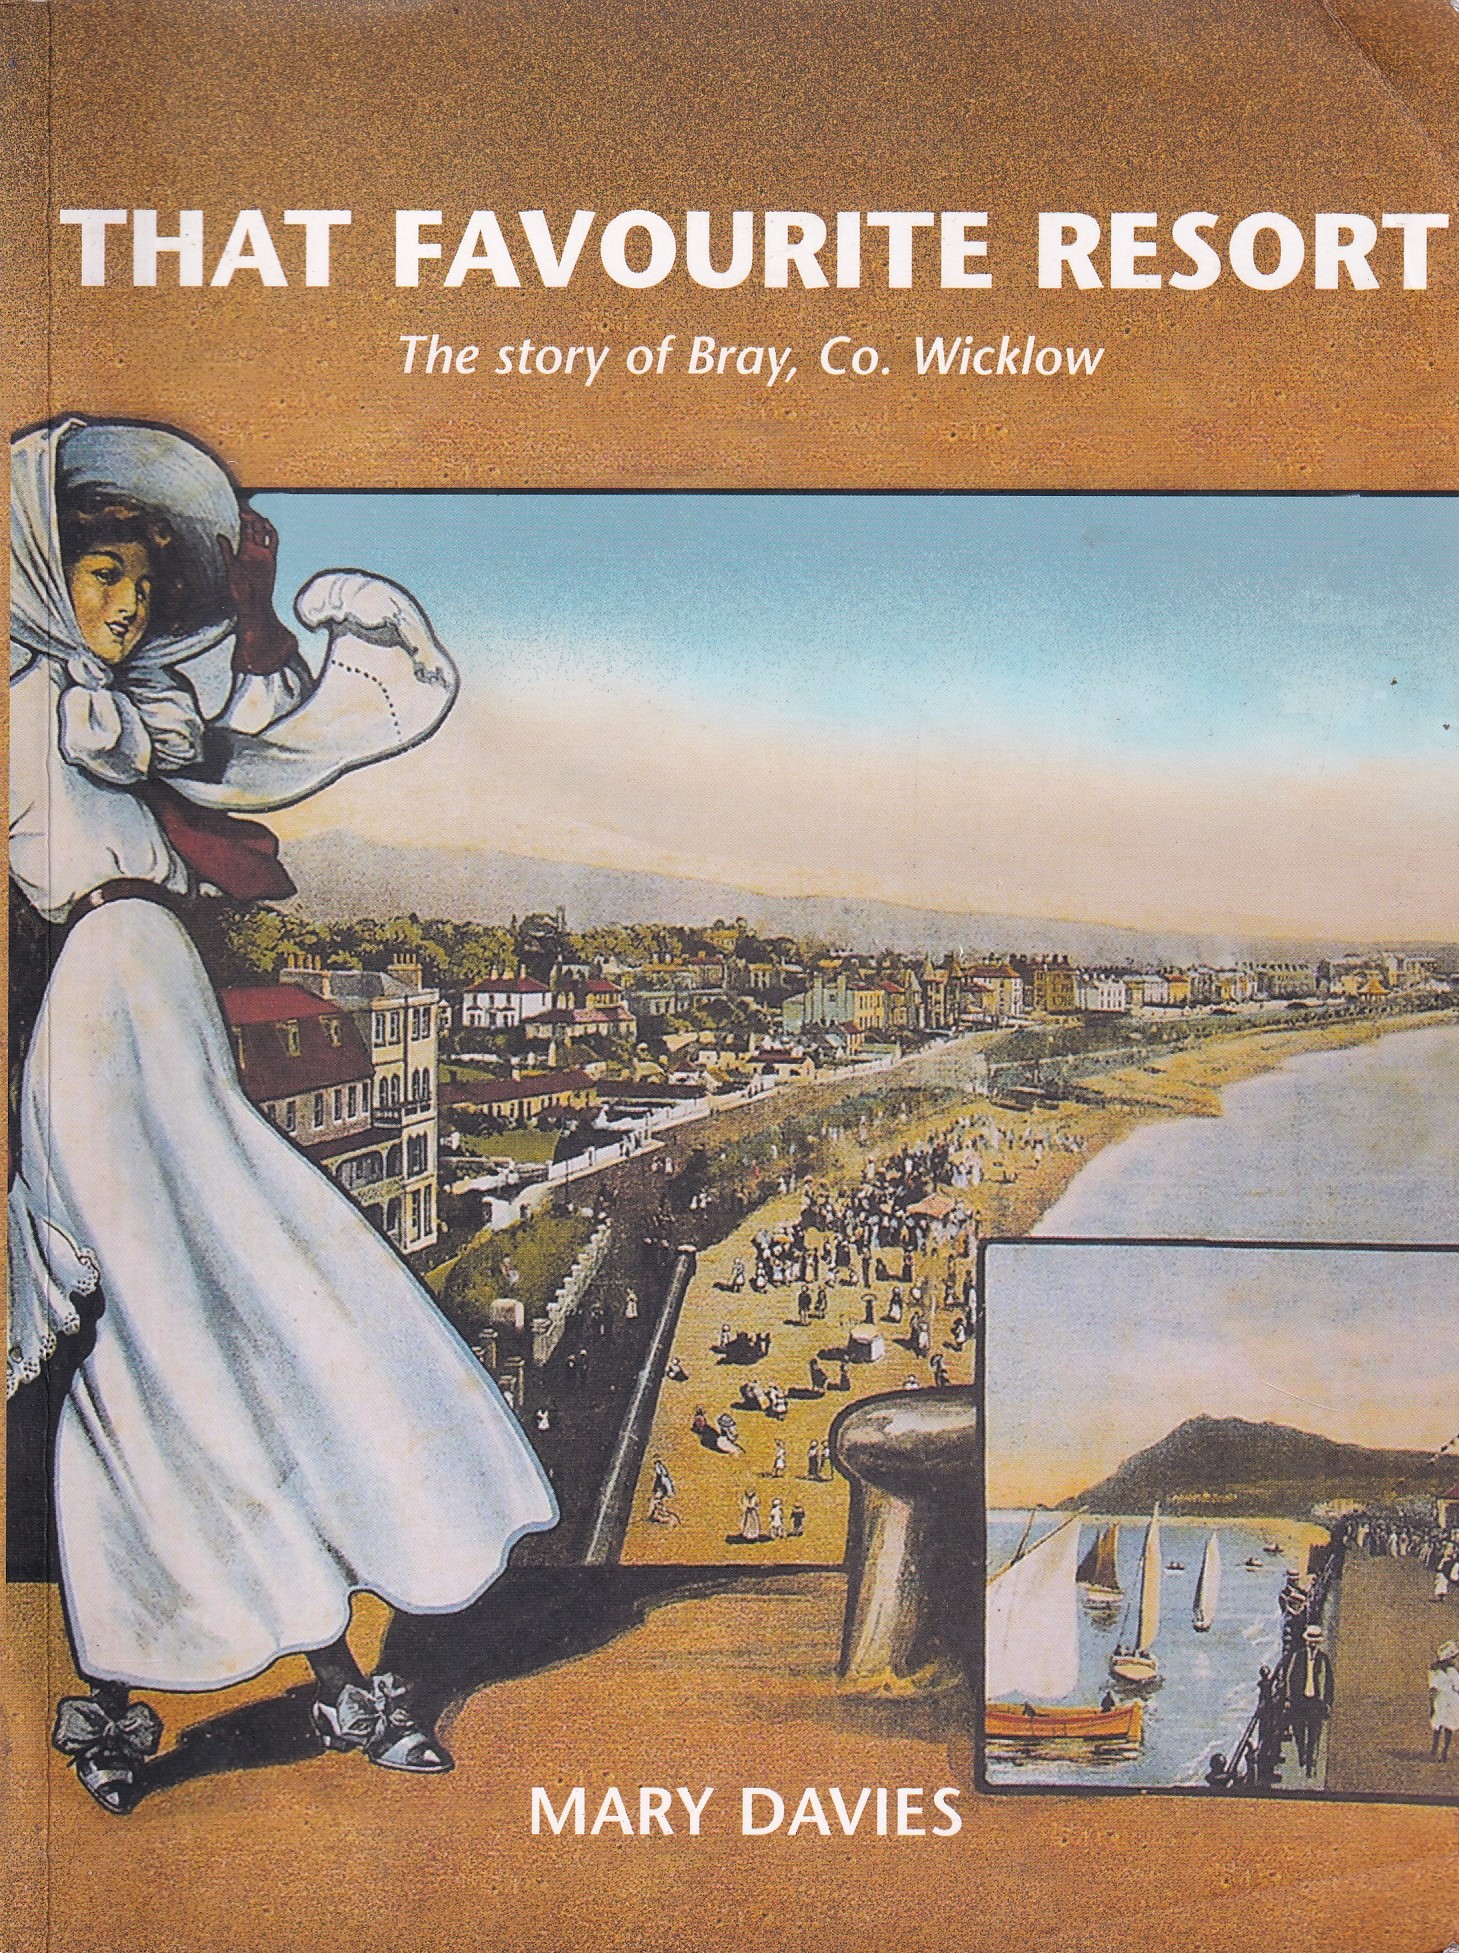 That Favourite Resort: The Story of Bray, Co. Wicklow | Mary Davies | Charlie Byrne's